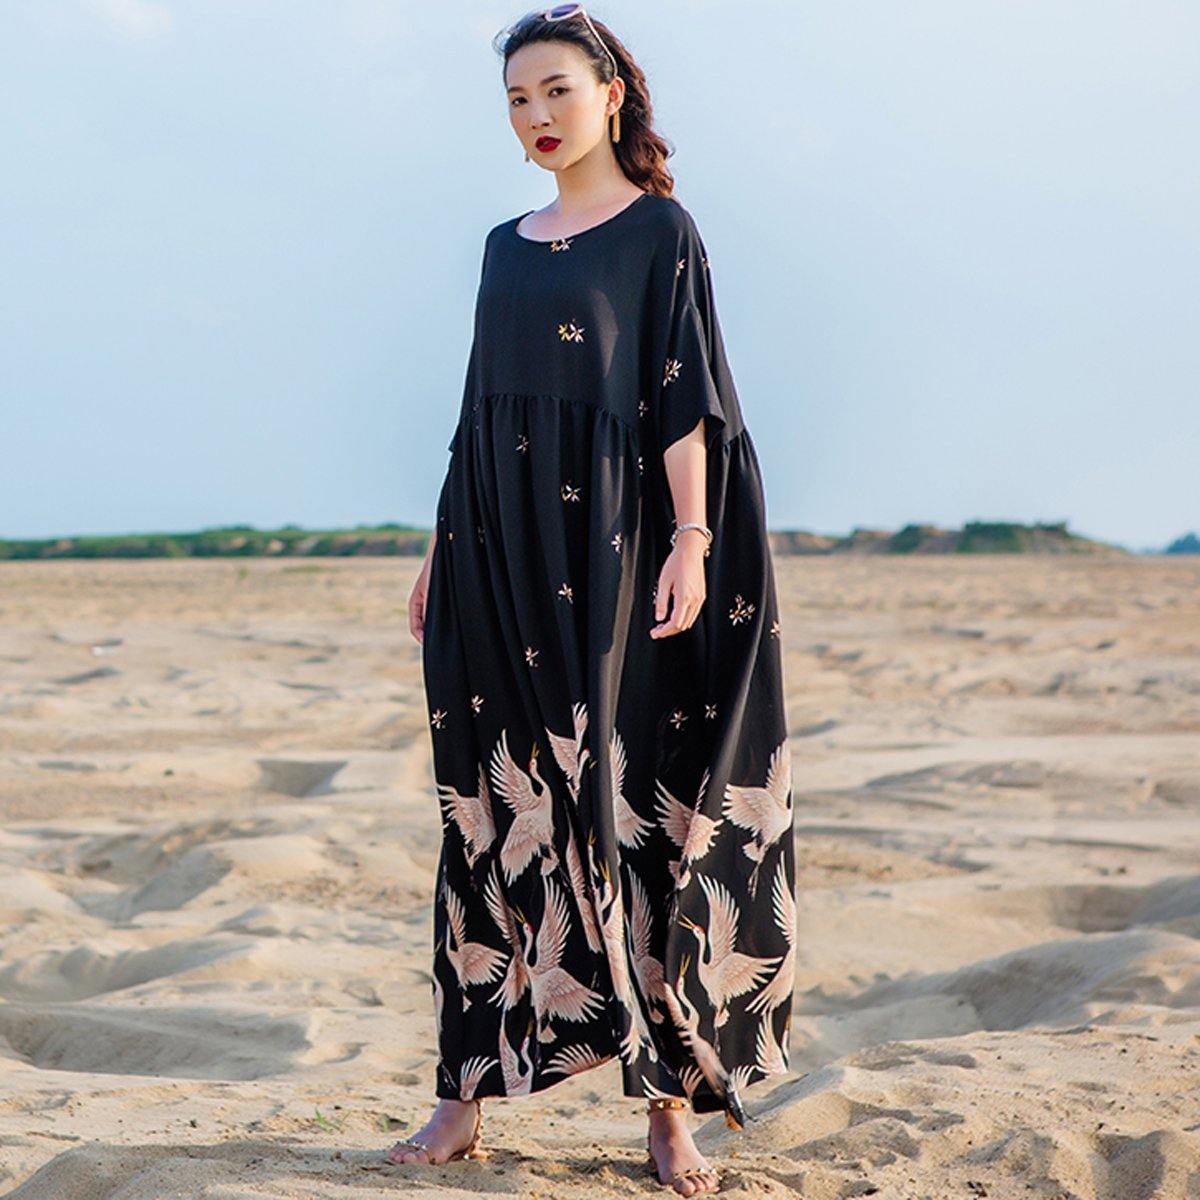 Printed Folk Style Casual Loose Maxi Short Sleeve Dress For Women 2019 May New M Black 